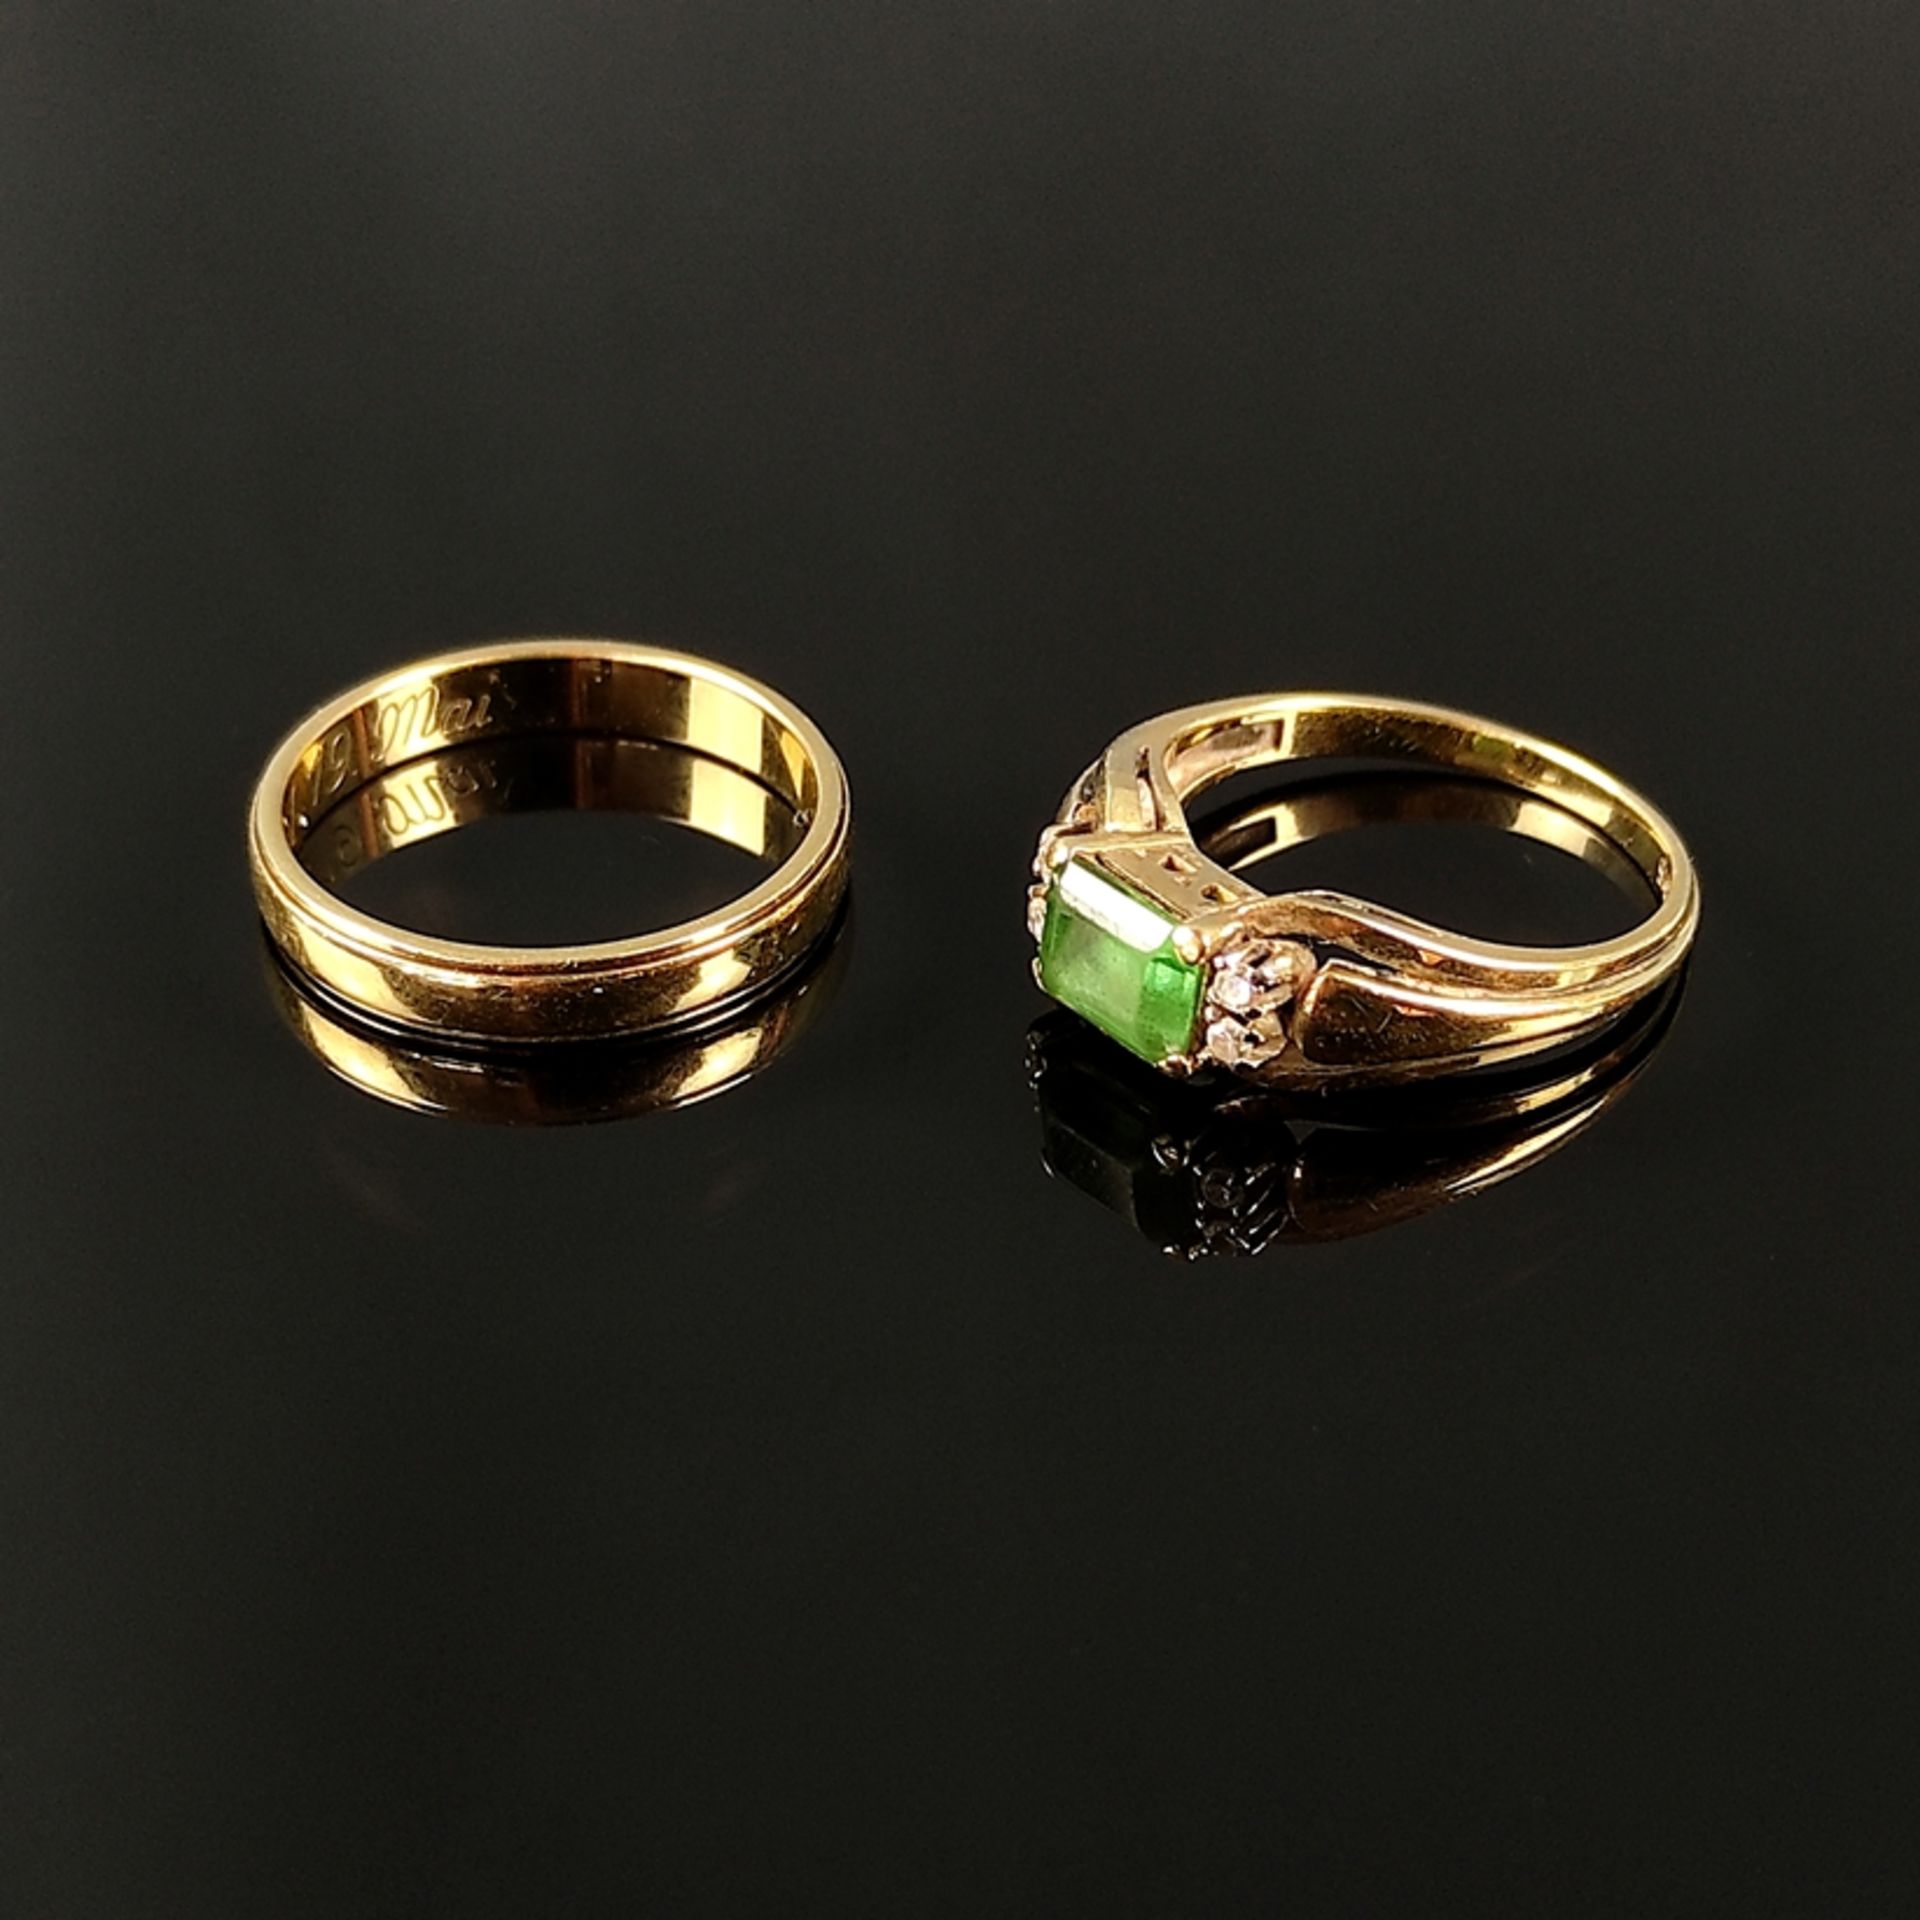 Two gold rings, one 585/14K yellow gold, 4.33g, center green faceted gemstone flanked by two small 